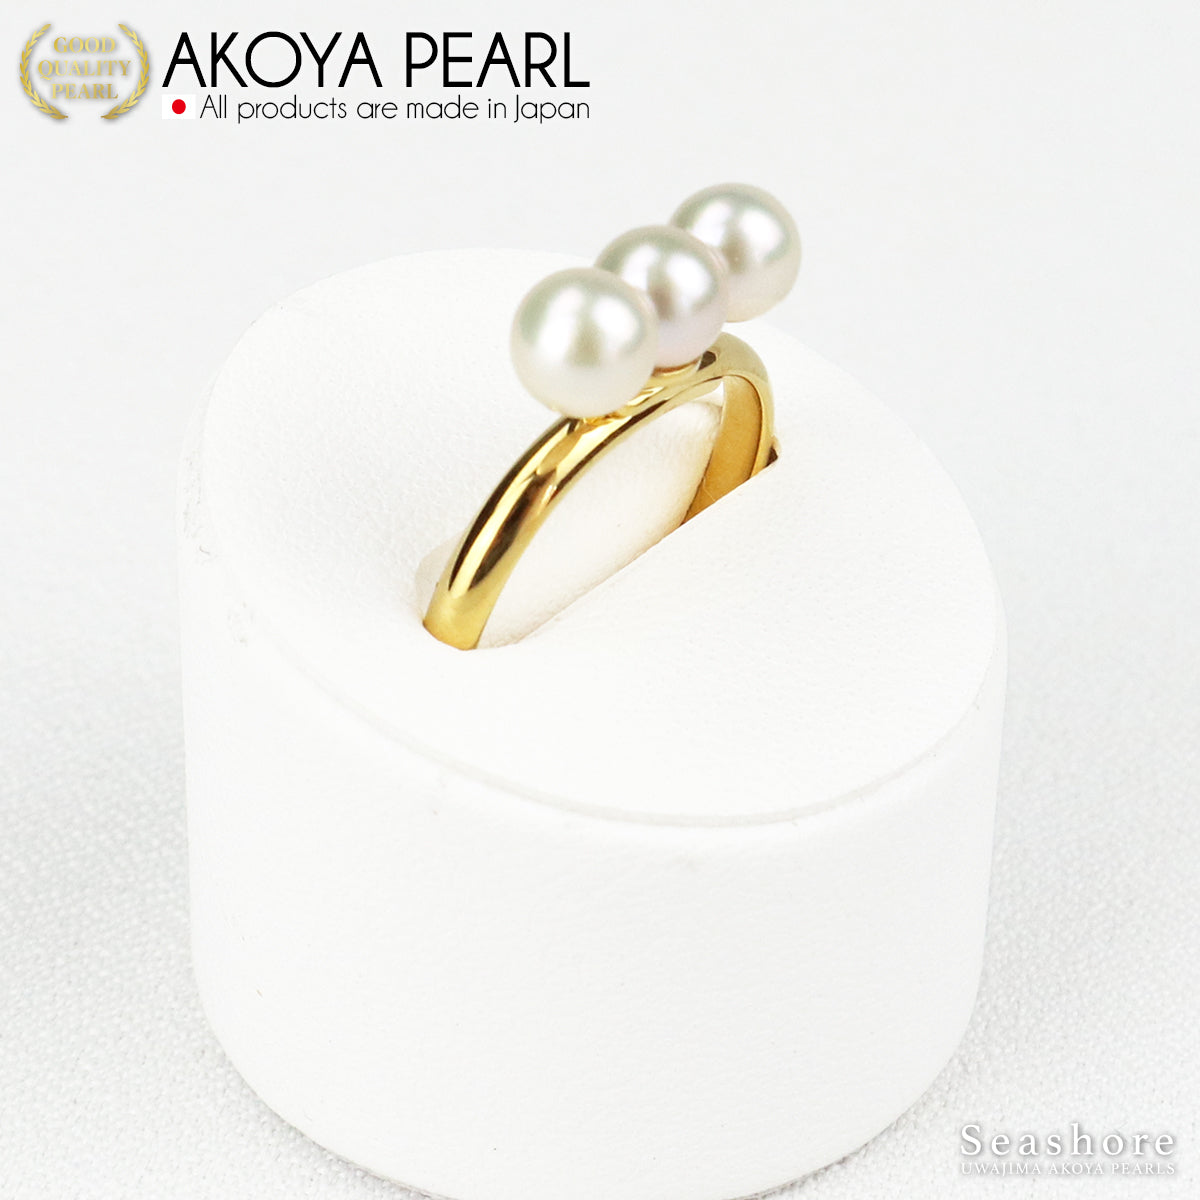 3 beads pearl ring free size 5.0-5.5mm Akoya pearl 2 colors brass silver / gold bar ring